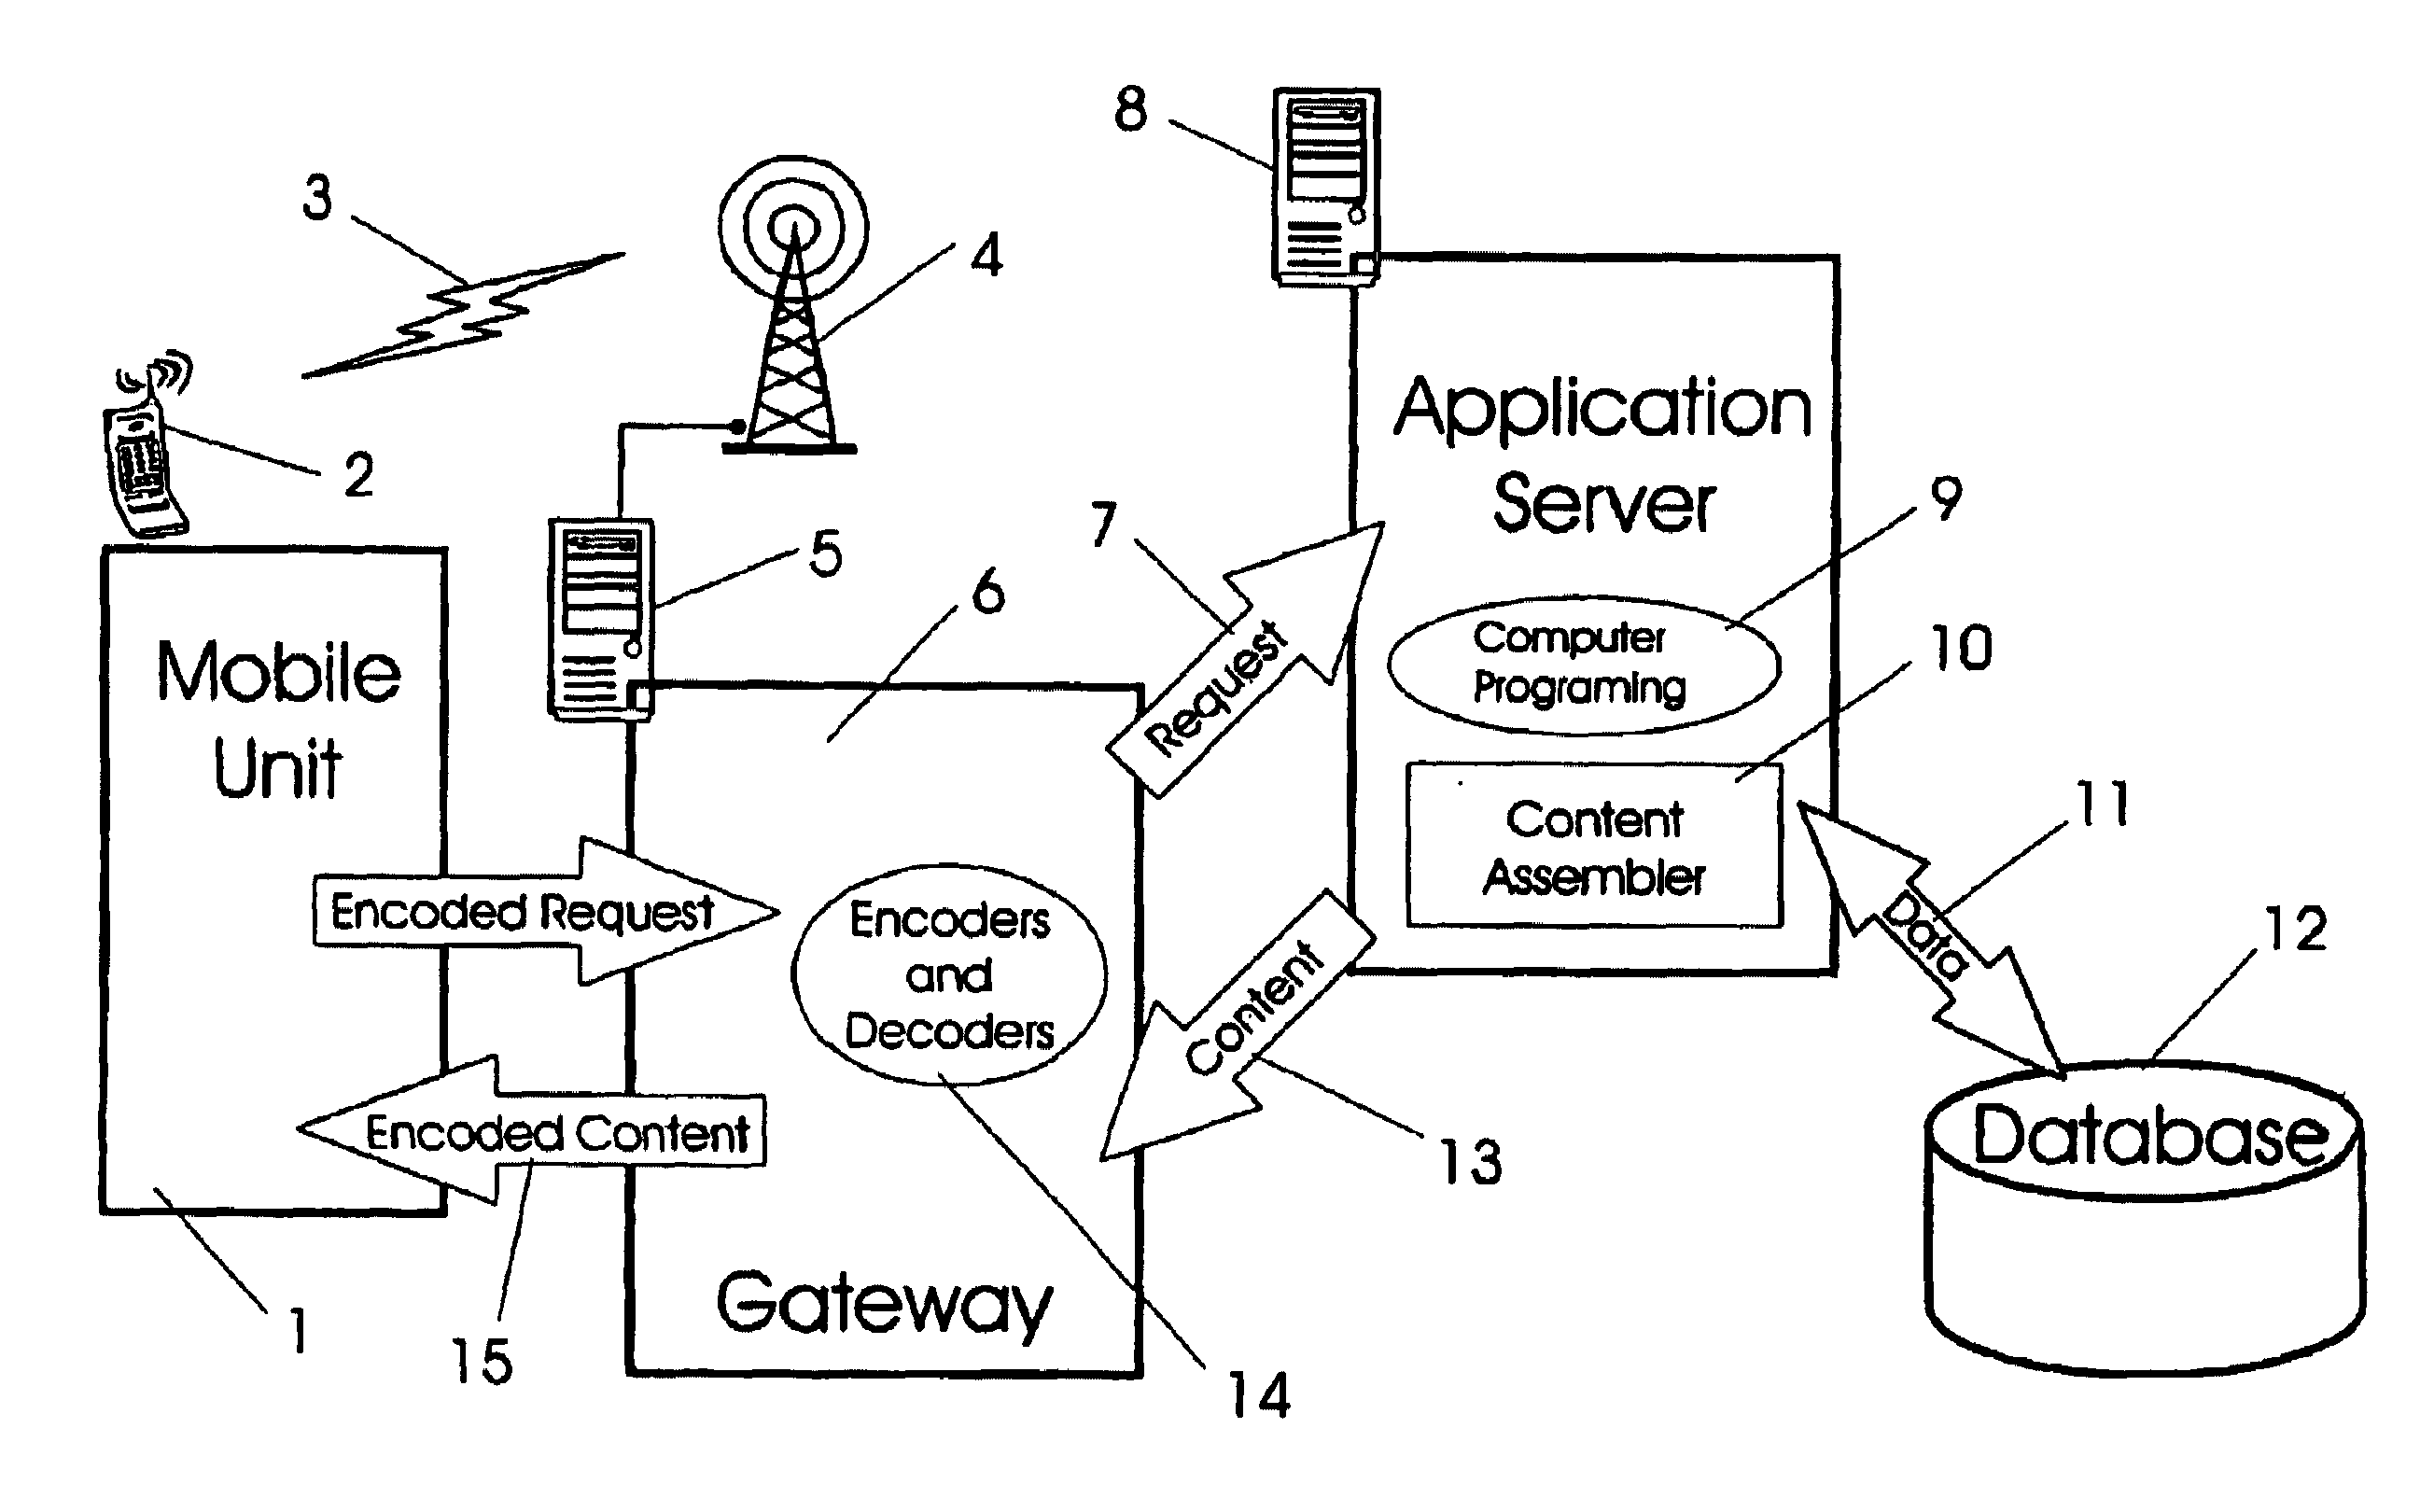 Pointing systems for addressing objects